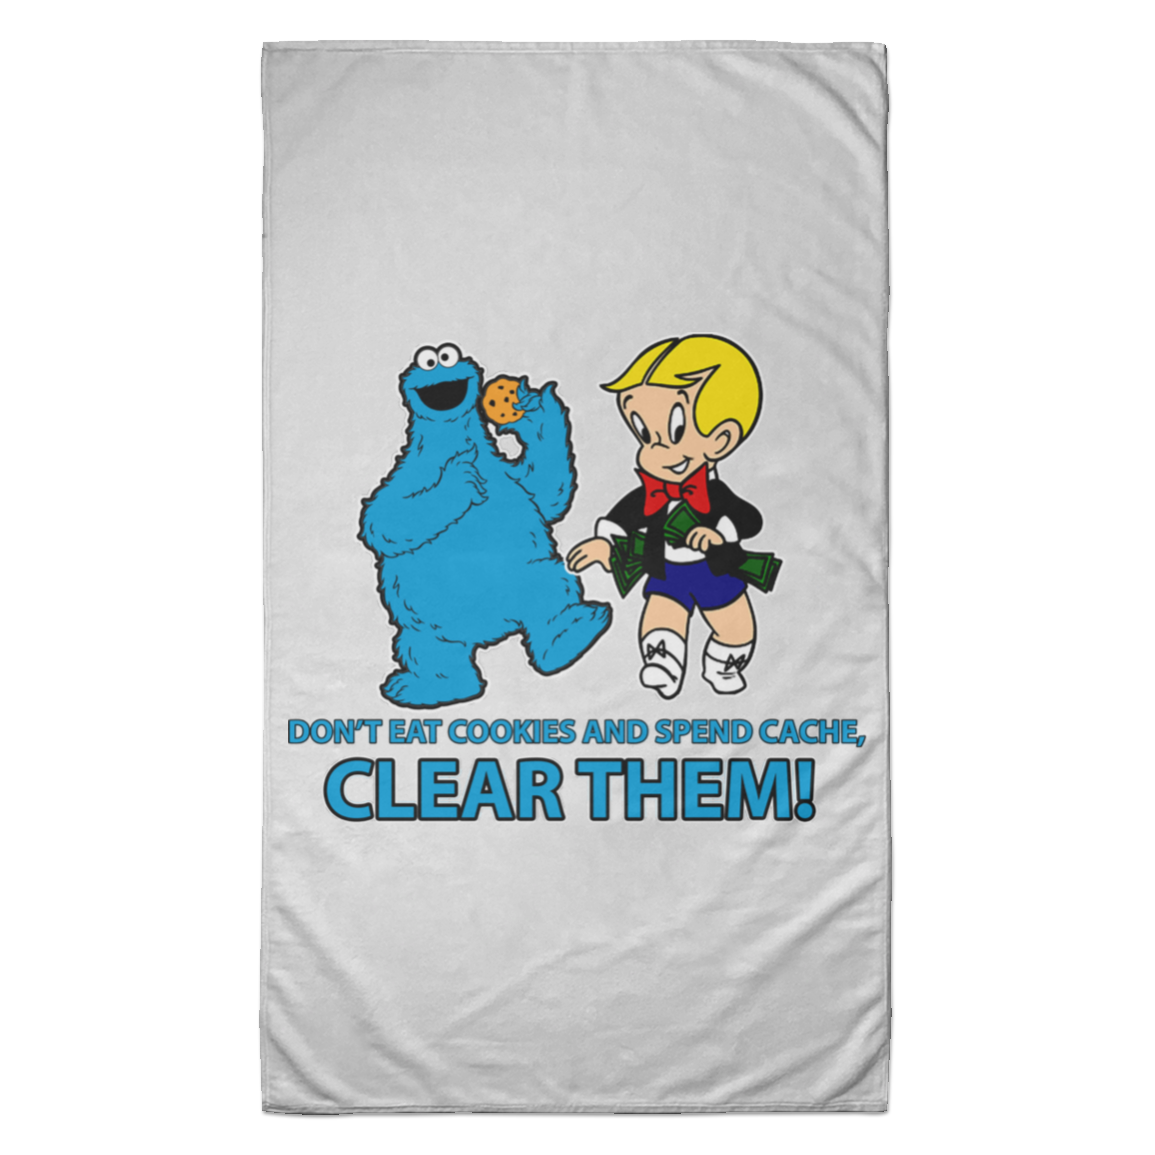 ArtichokeUSA Custom Design. Don't Eat Cookies And Spend Cache! Delete Them! Cookie Monster and Richie Rich Fan Art/Parody. Towel - 35x60